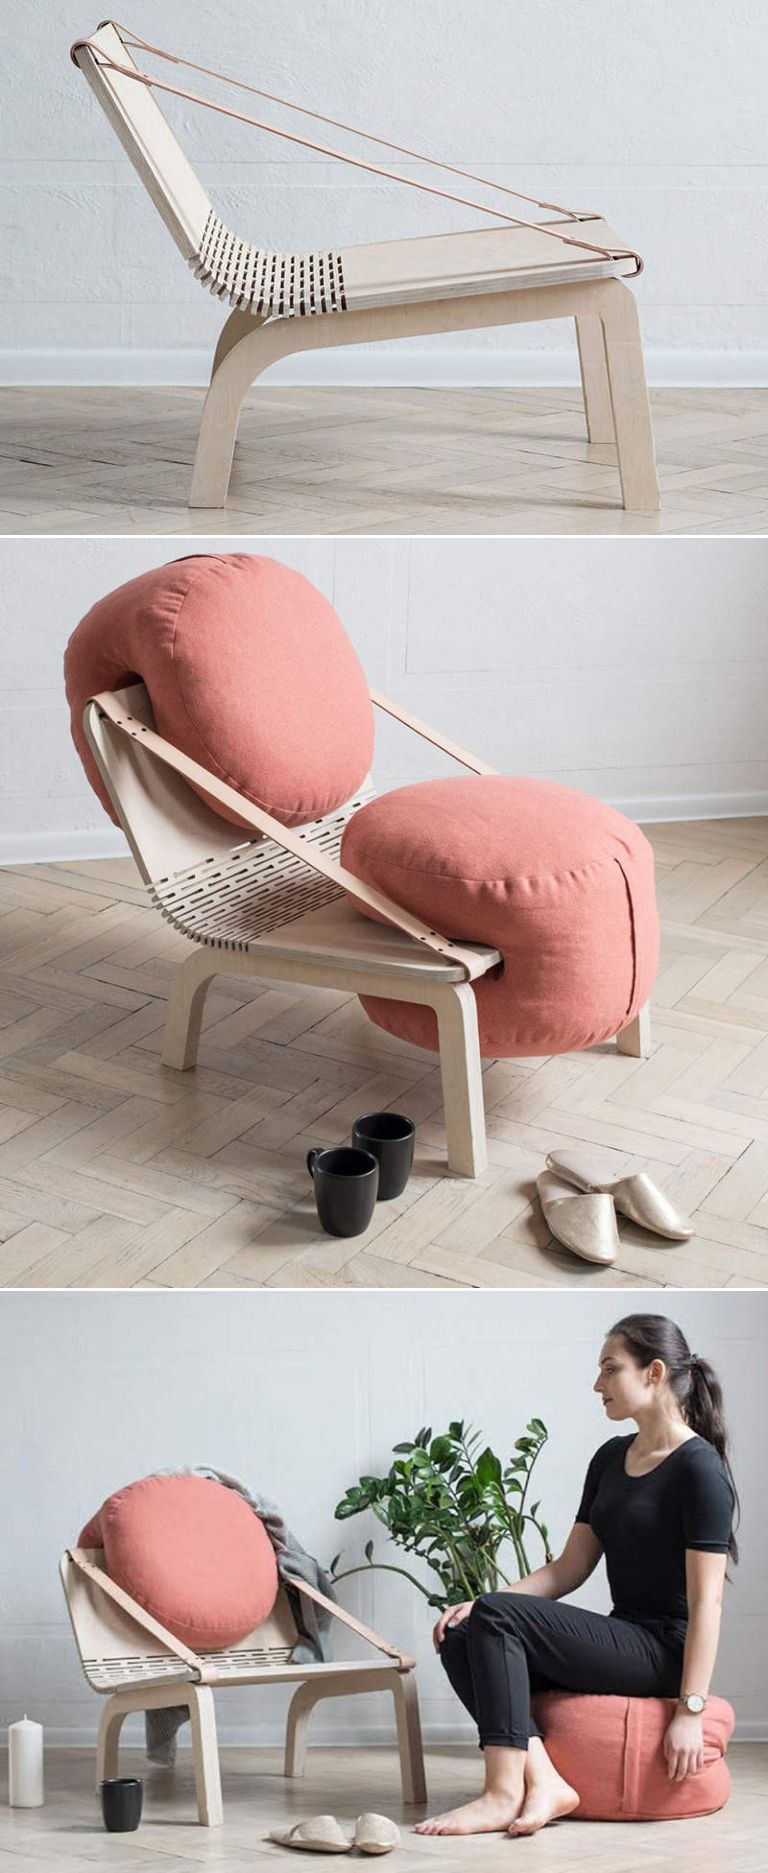 Compact Comfort: Relax in Style with
Small Chairs